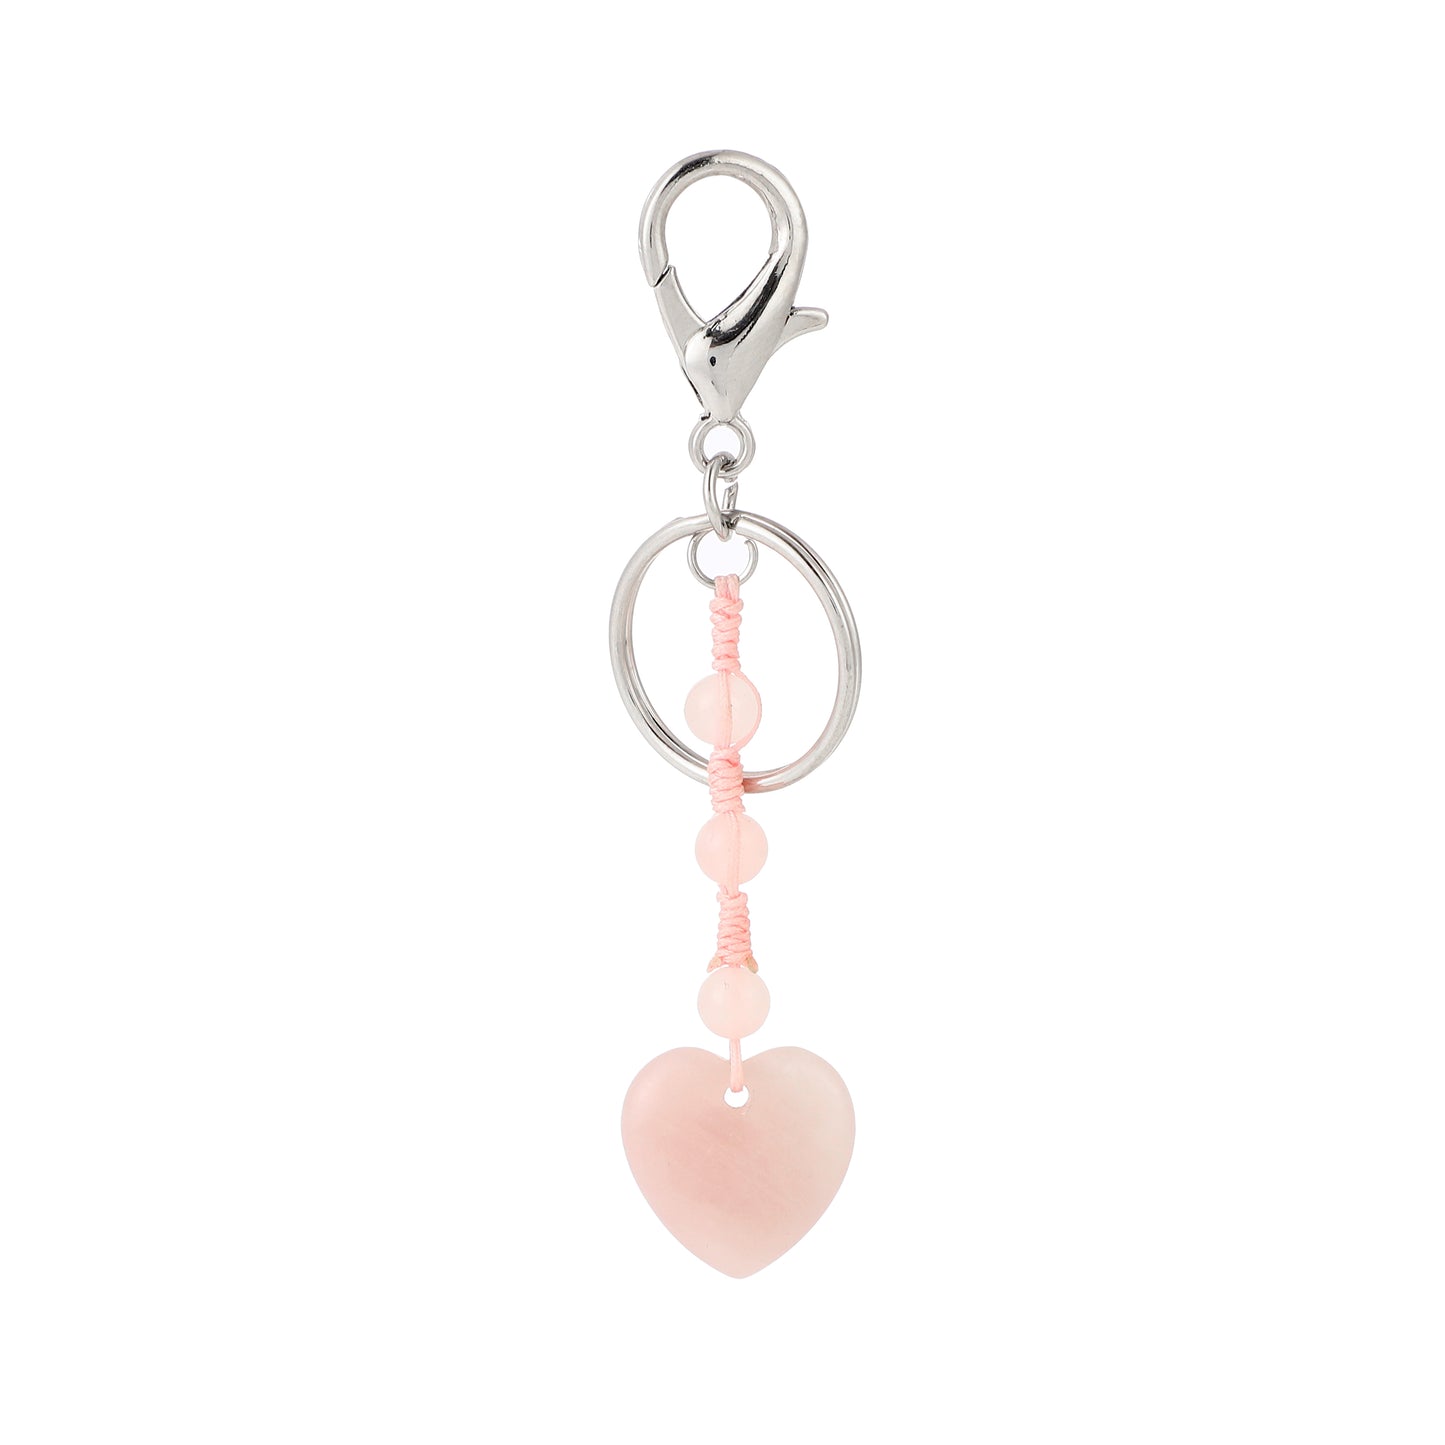 Exquisite 20-Heart Key Chain - Carry Love and Style Everywhere